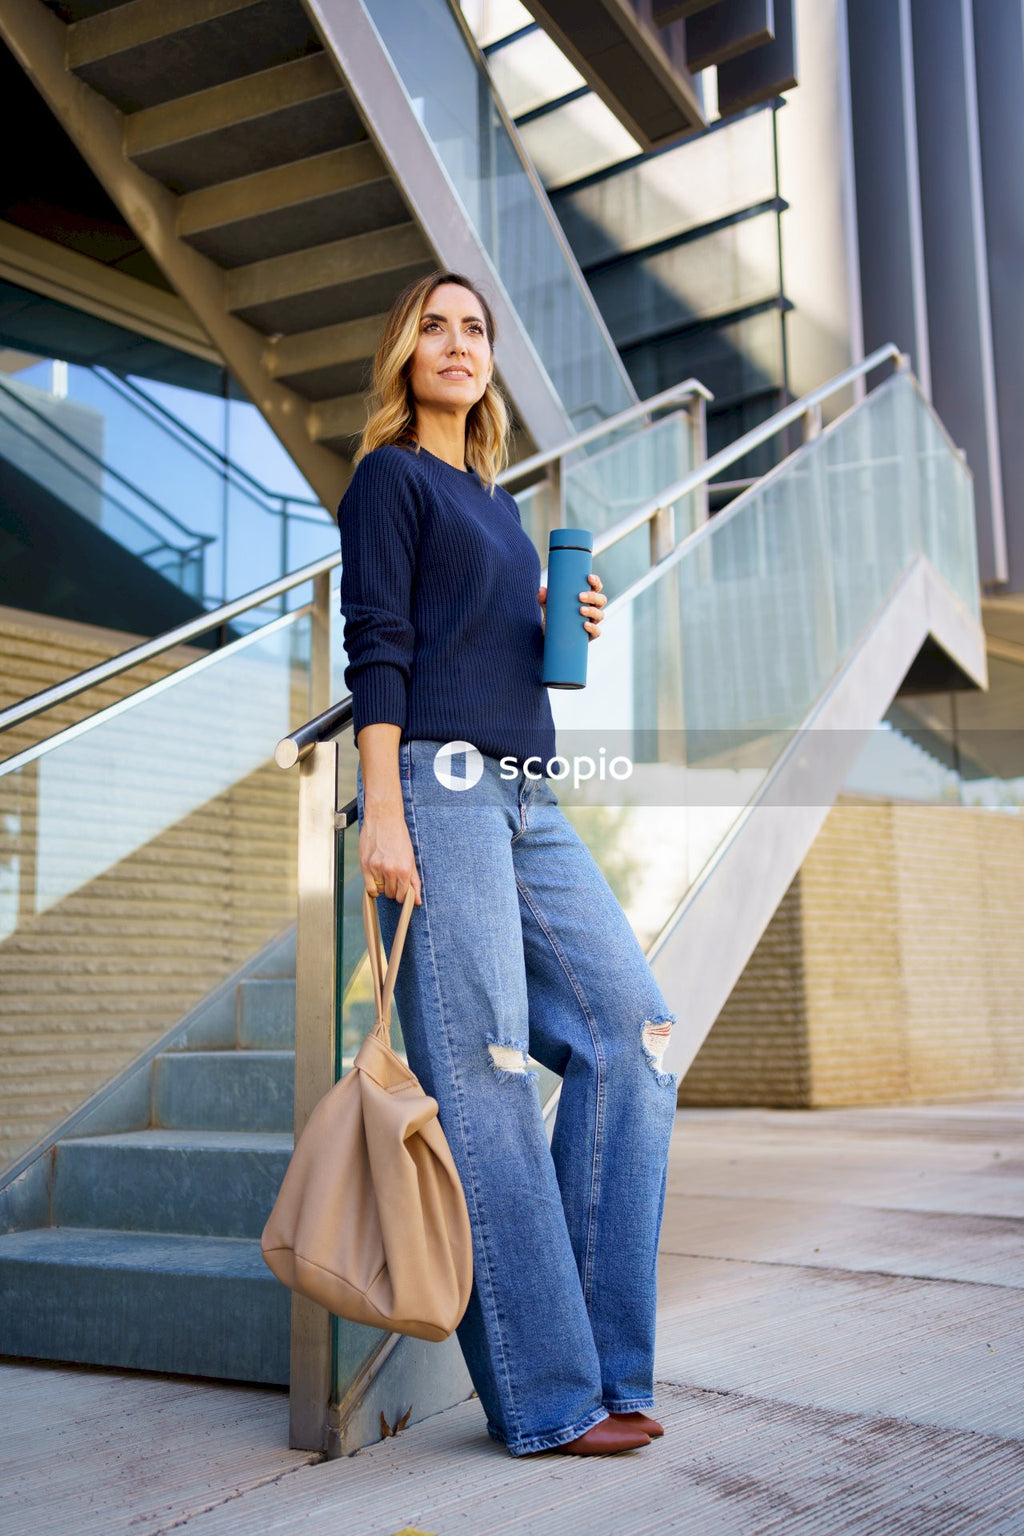 Woman in blue long sleeve shirt and gray pants standing on white staircase